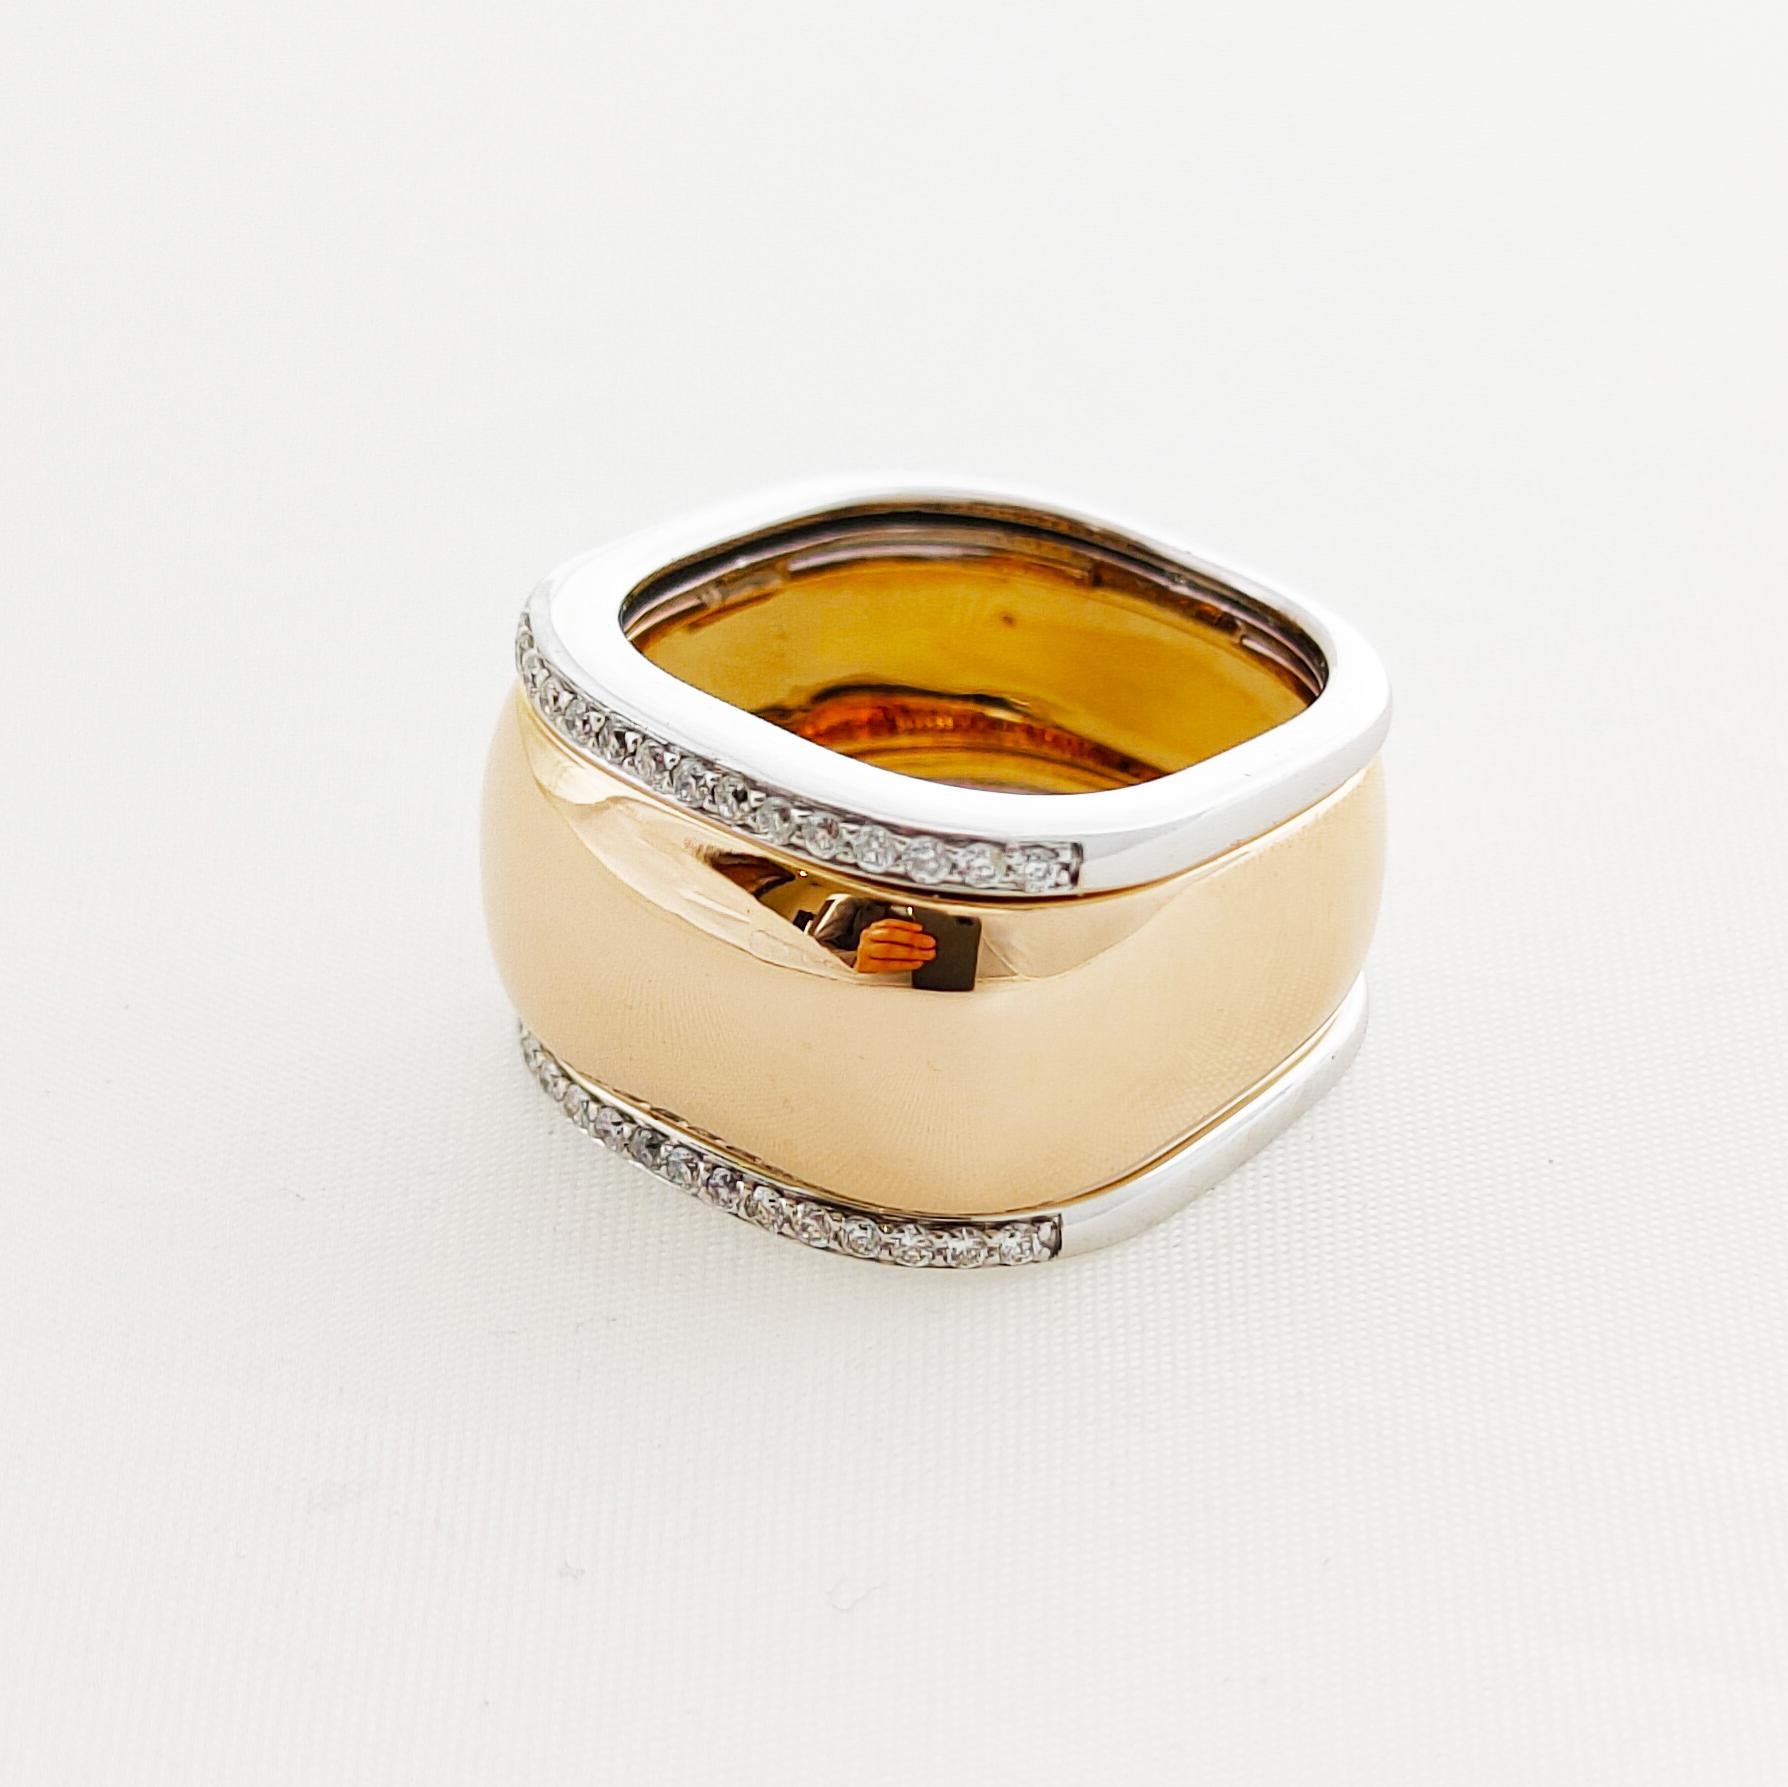 This comfortable ring has a square profile which makes this ring by Italian designer Centoventuno a modern elegant statement with a flair of masculinity for a modern, androgynous aesthetic. 

The ring is made in 18 karat rose gold. This 14mm wide